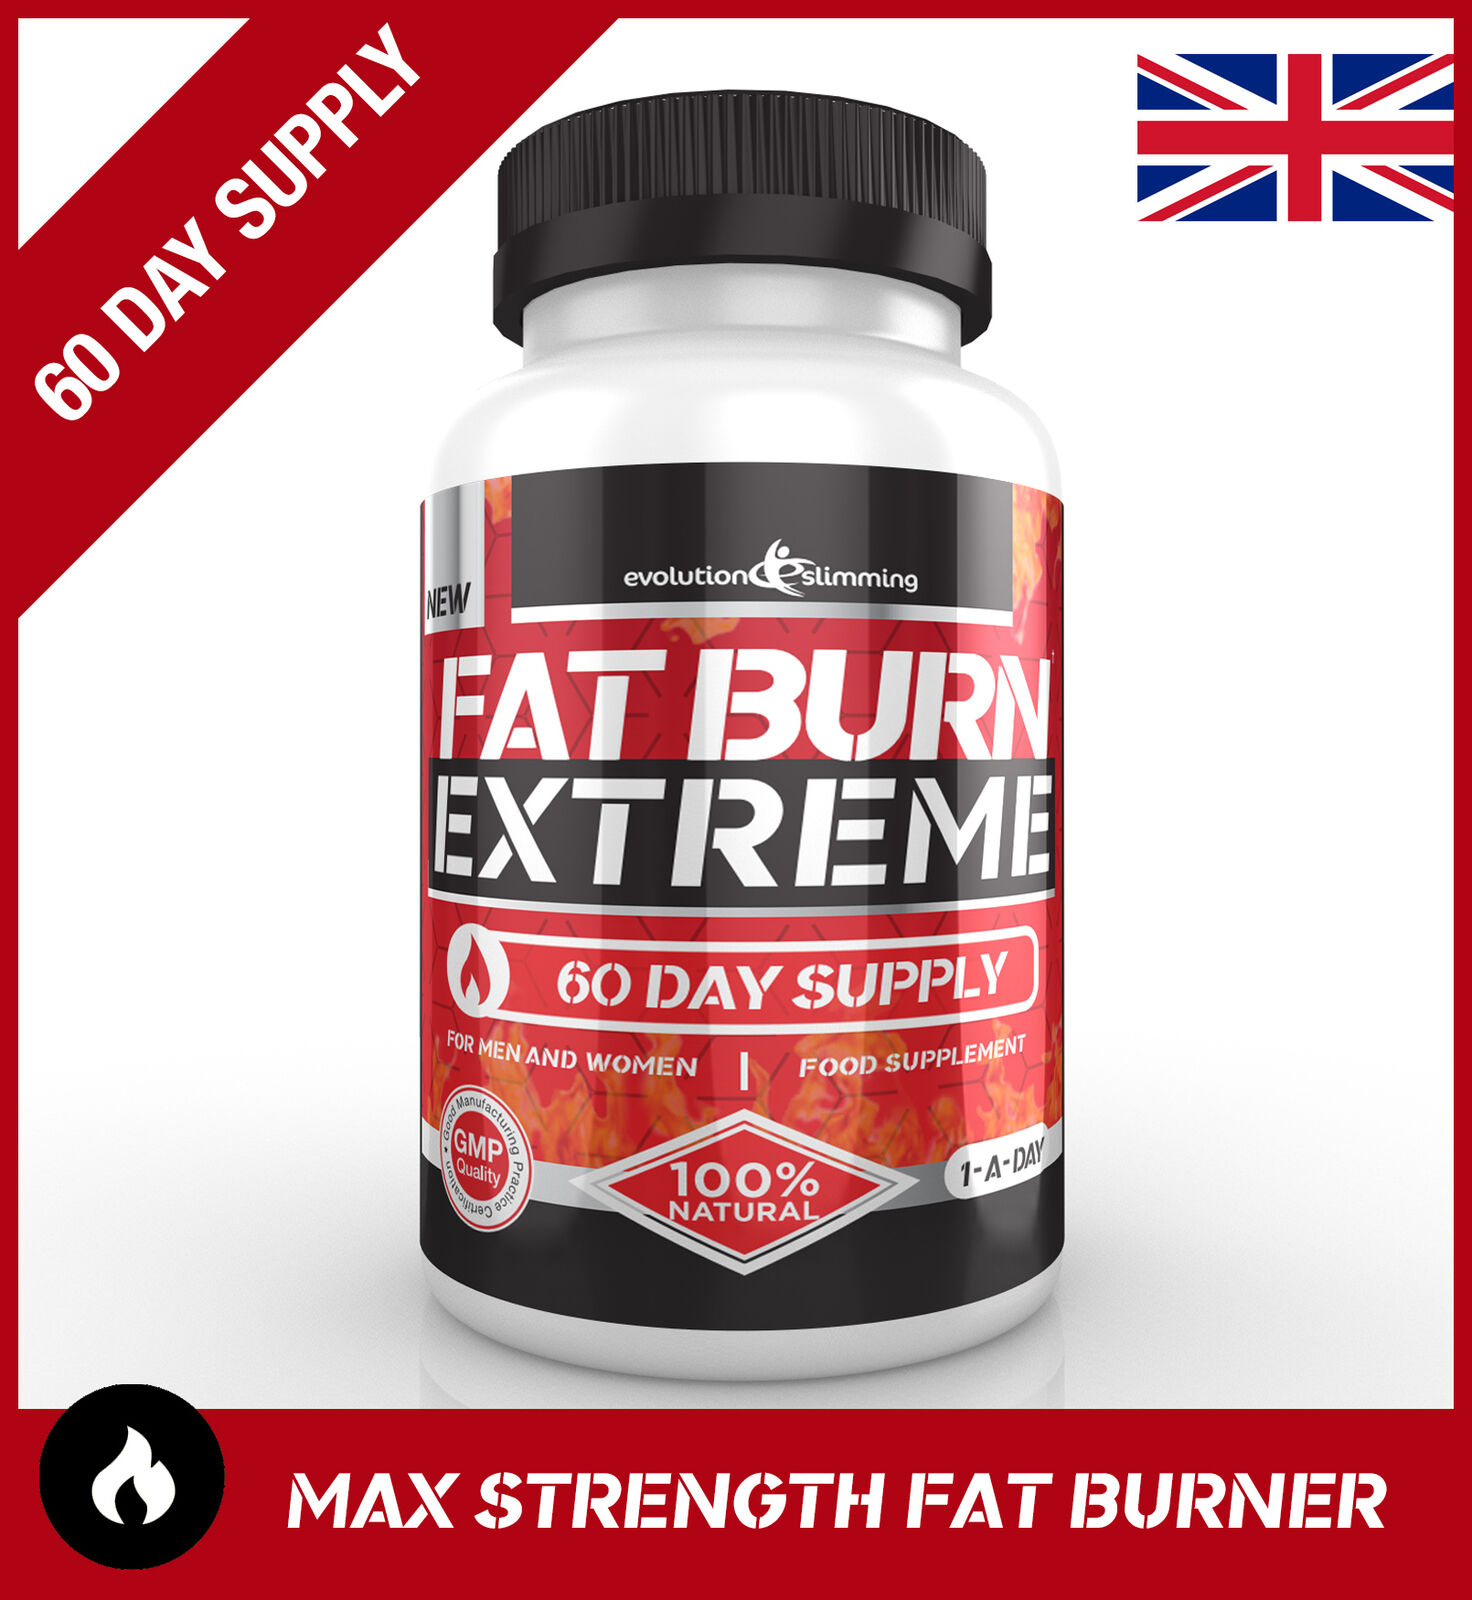 FAT BURN EXTREME Weight Loss Diet Pills STRONGEST Legal Fat Burner *60 Capsules*